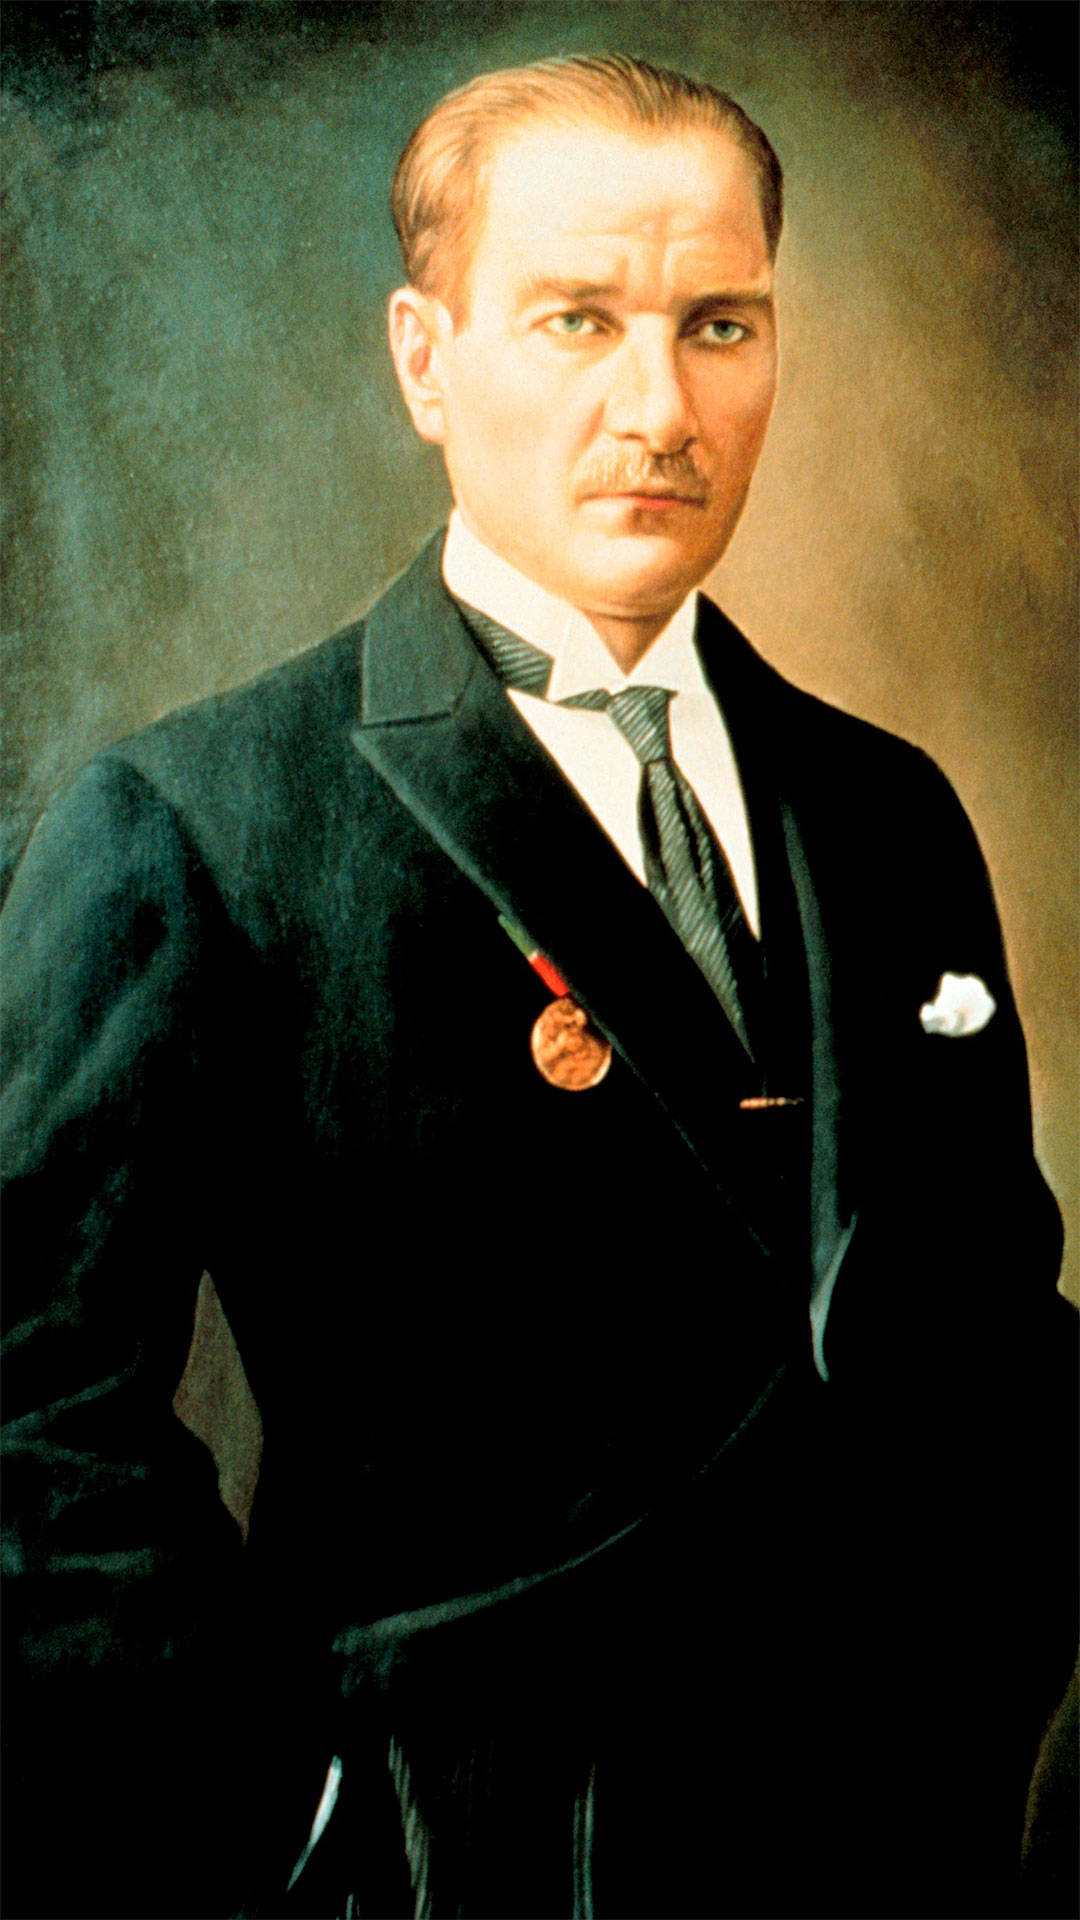 Painting Of A Serious Ataturk Wallpaper